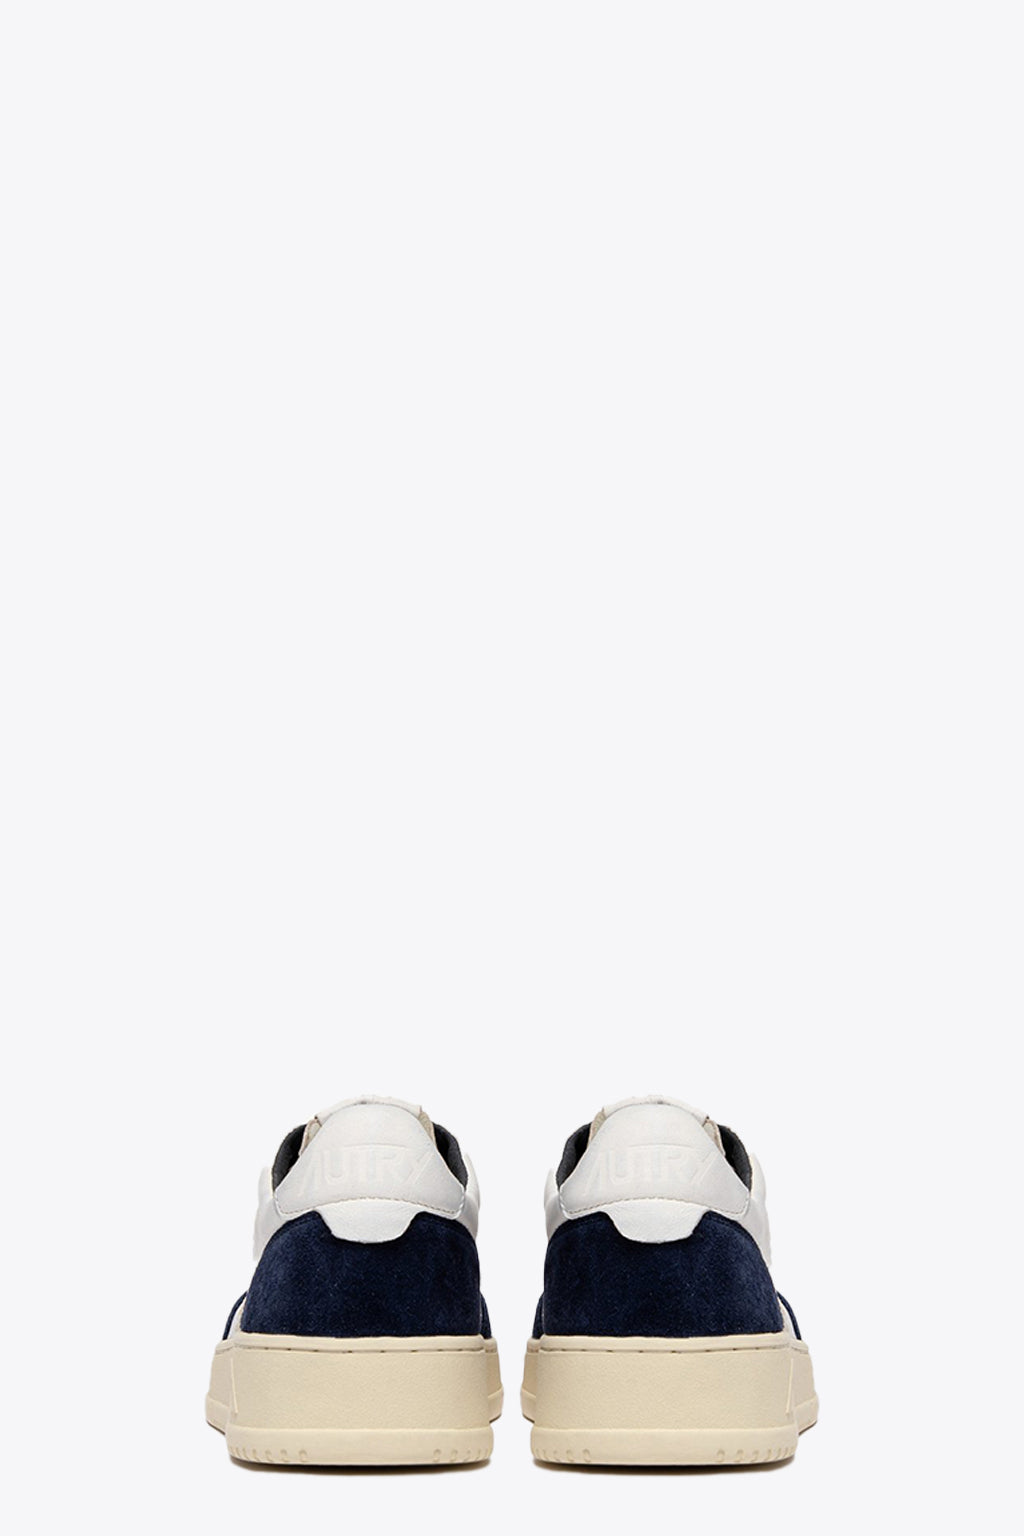 alt-image__White-leather-low-sneaker-with-black-suede-detail---Medalist